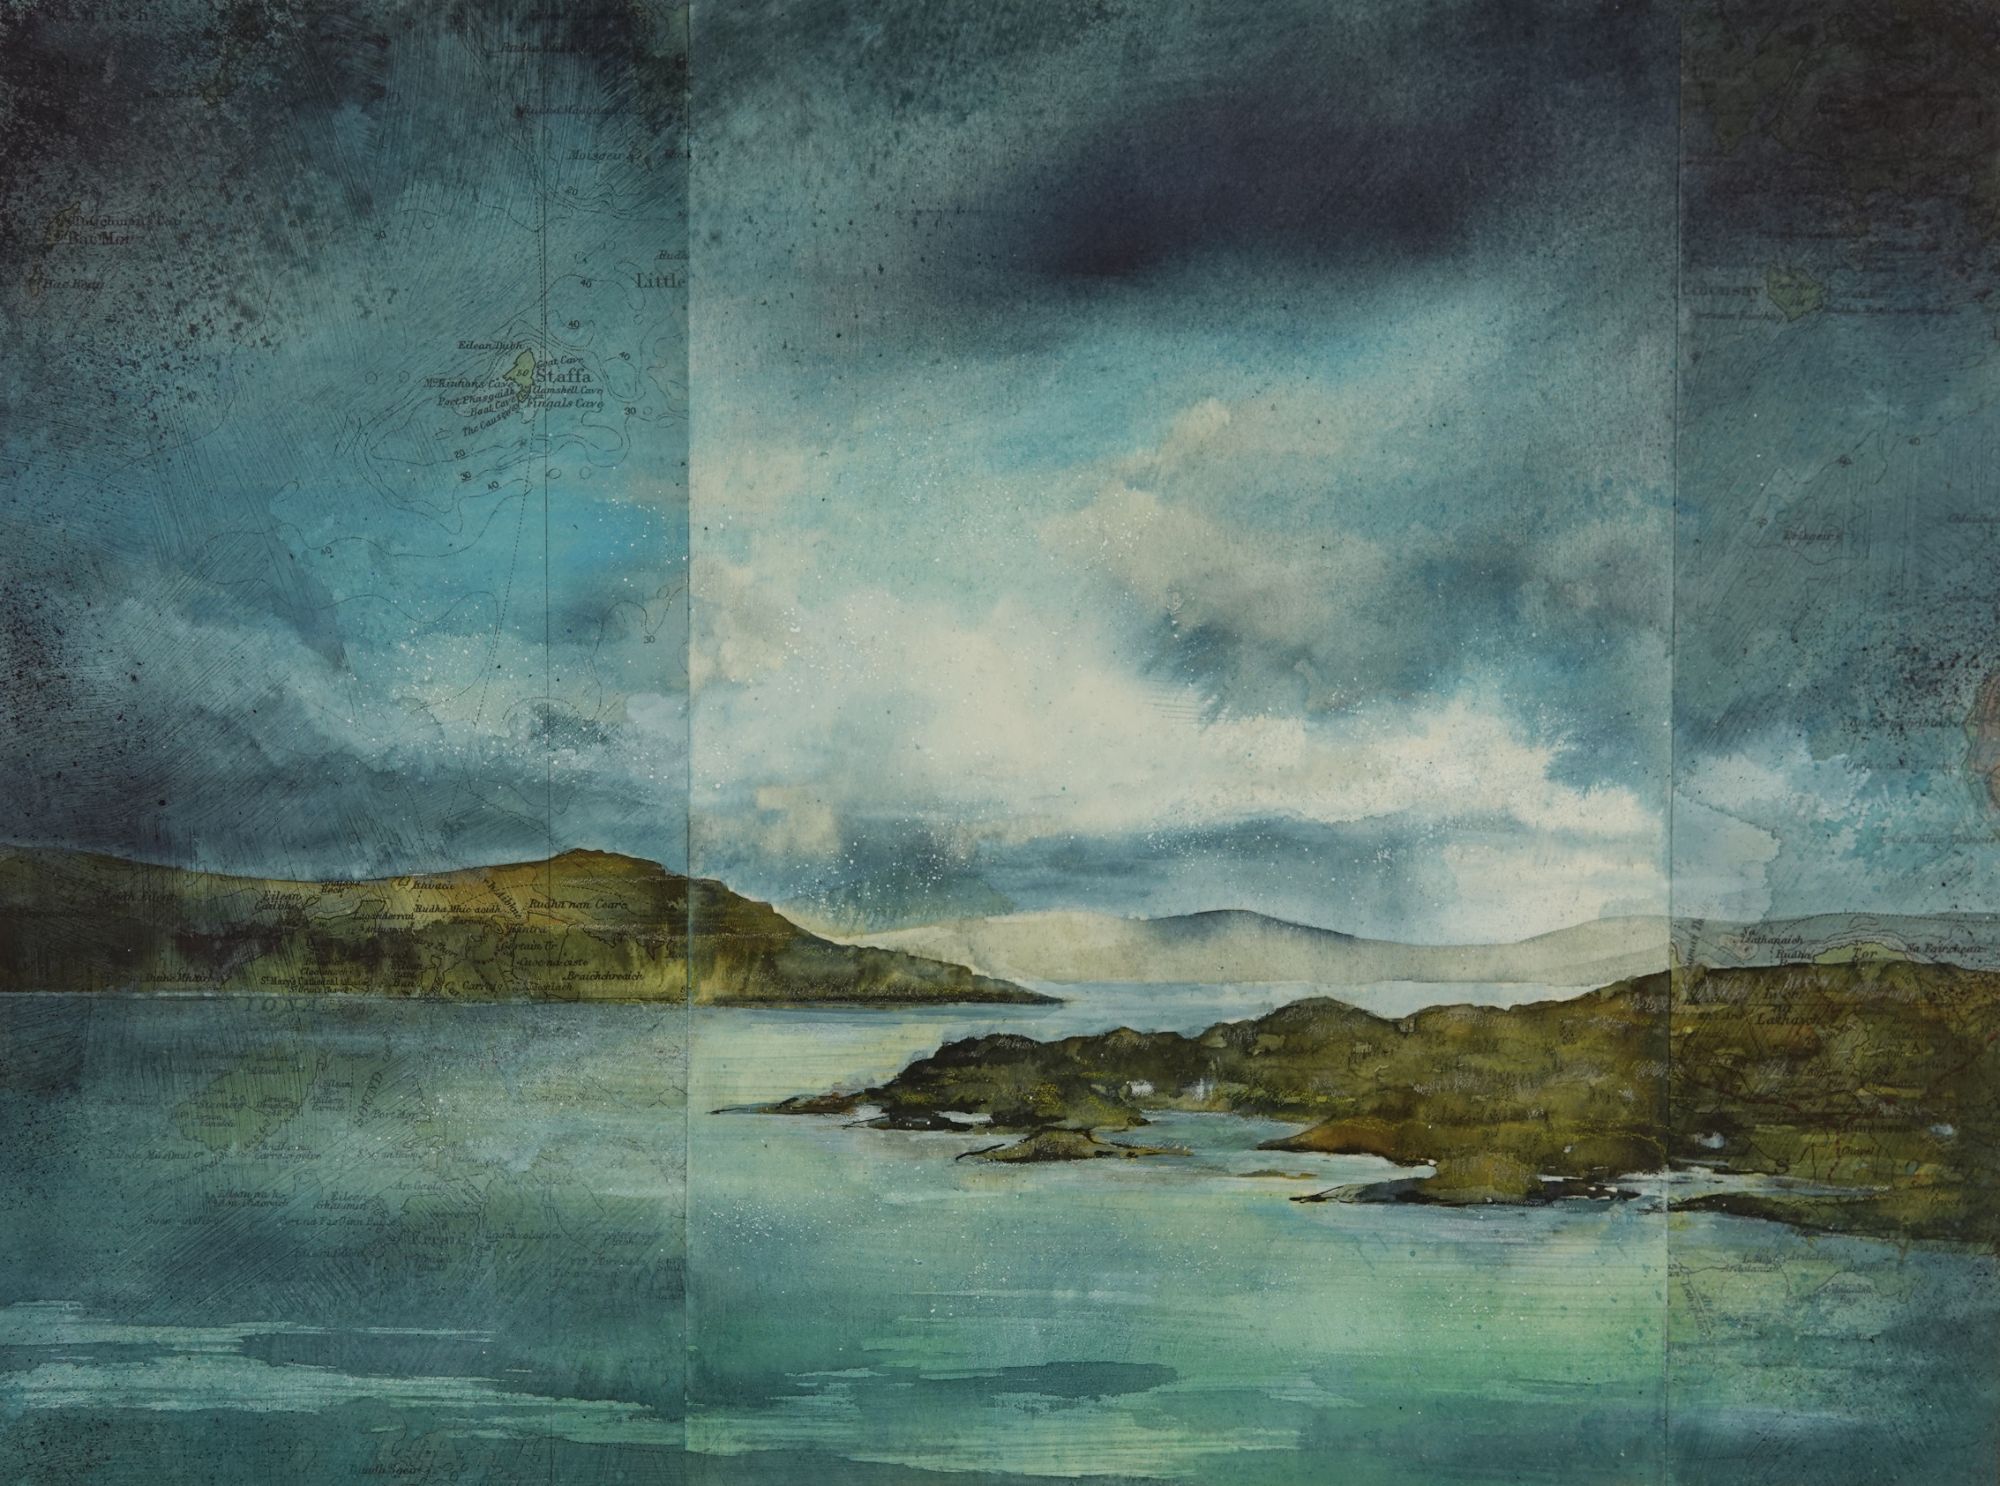 Distant view to Mull from Iona 31x41 cm acrylic ink and coloured pencil on split map showing Iona 2022 JJMcLaren.JPG